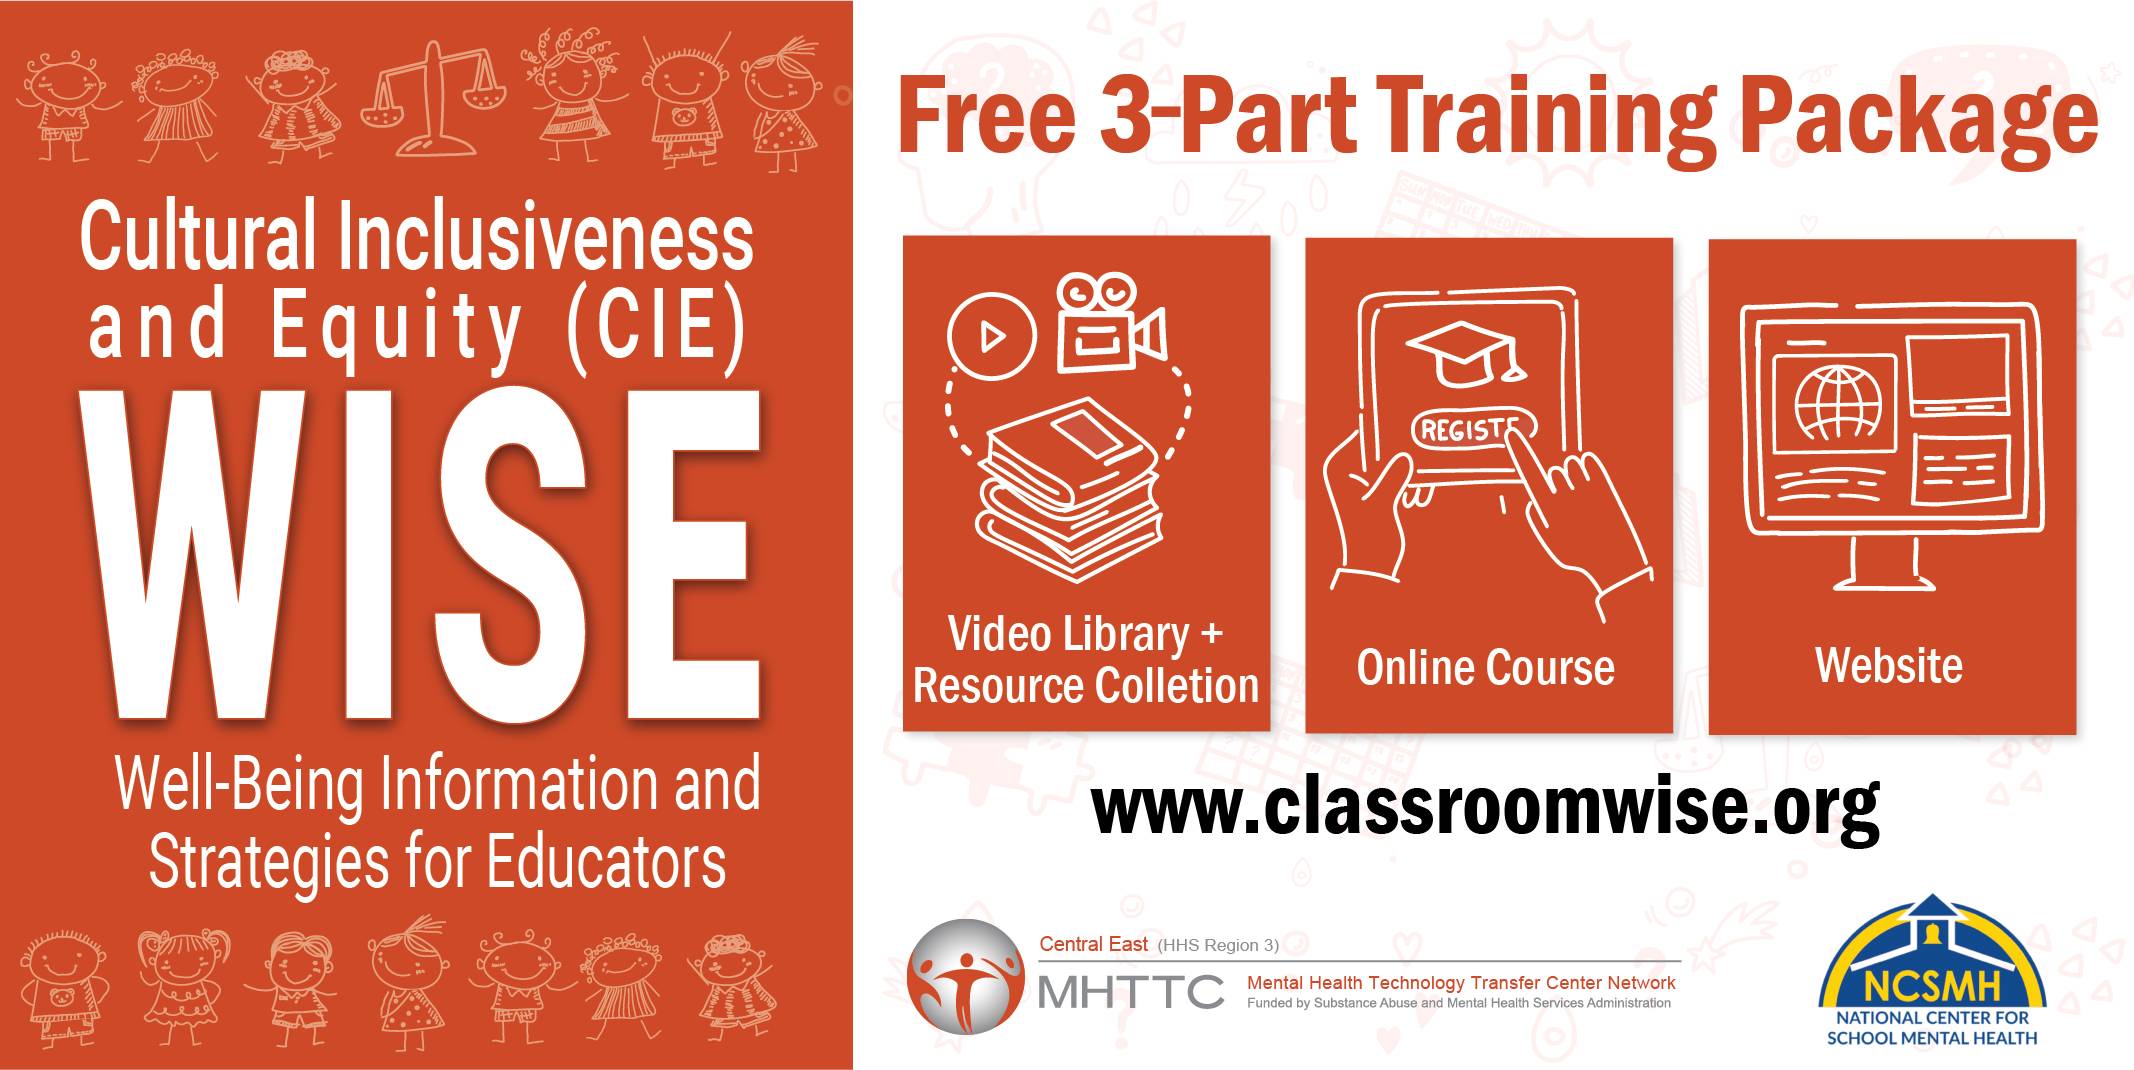 Orange logo that reads “Cultural Inclusivness and Equity (CIE) WISE - Well-being Information and Strategies for Educators“ outlines of children surround the words. To the right of this logo reads “Free 3-Part Training Package: Video Library + Resource Collection, Online Course, Website“ and underneath has www.classroomwise.org and logos for the Central East MHHTC and NCSMH.